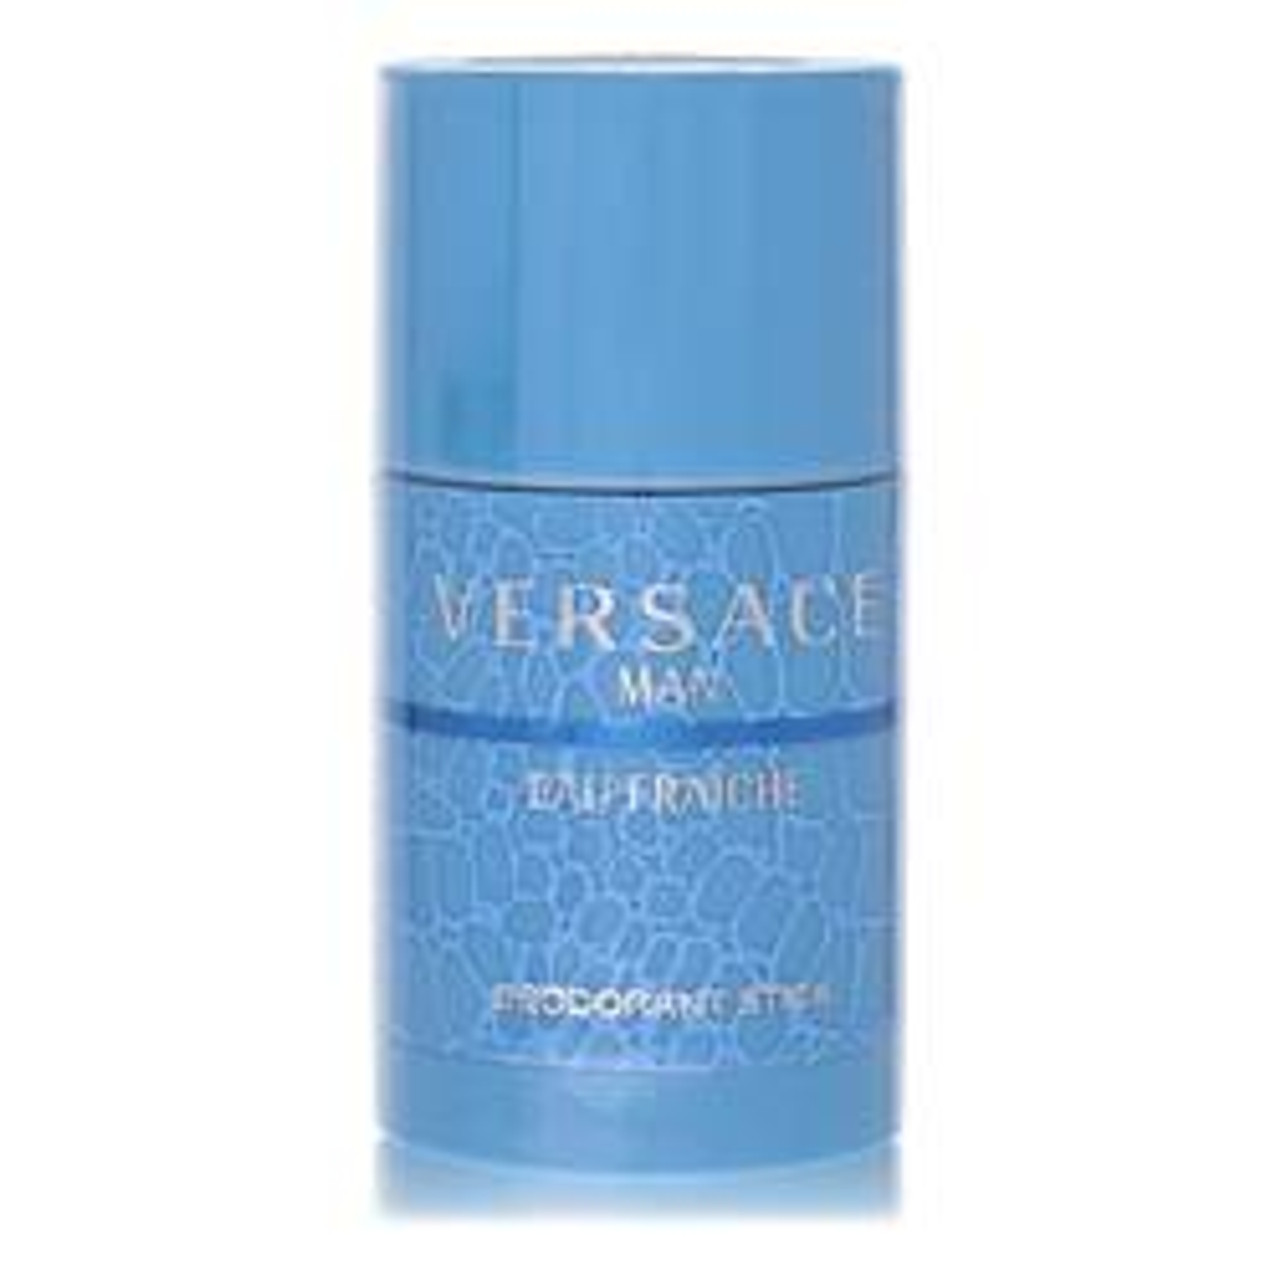 Versace Man Cologne By Versace Eau Fraiche Deodorant Stick 2.5 oz for Men - [From 79.50 - Choose pk Qty ] - *Ships from Miami